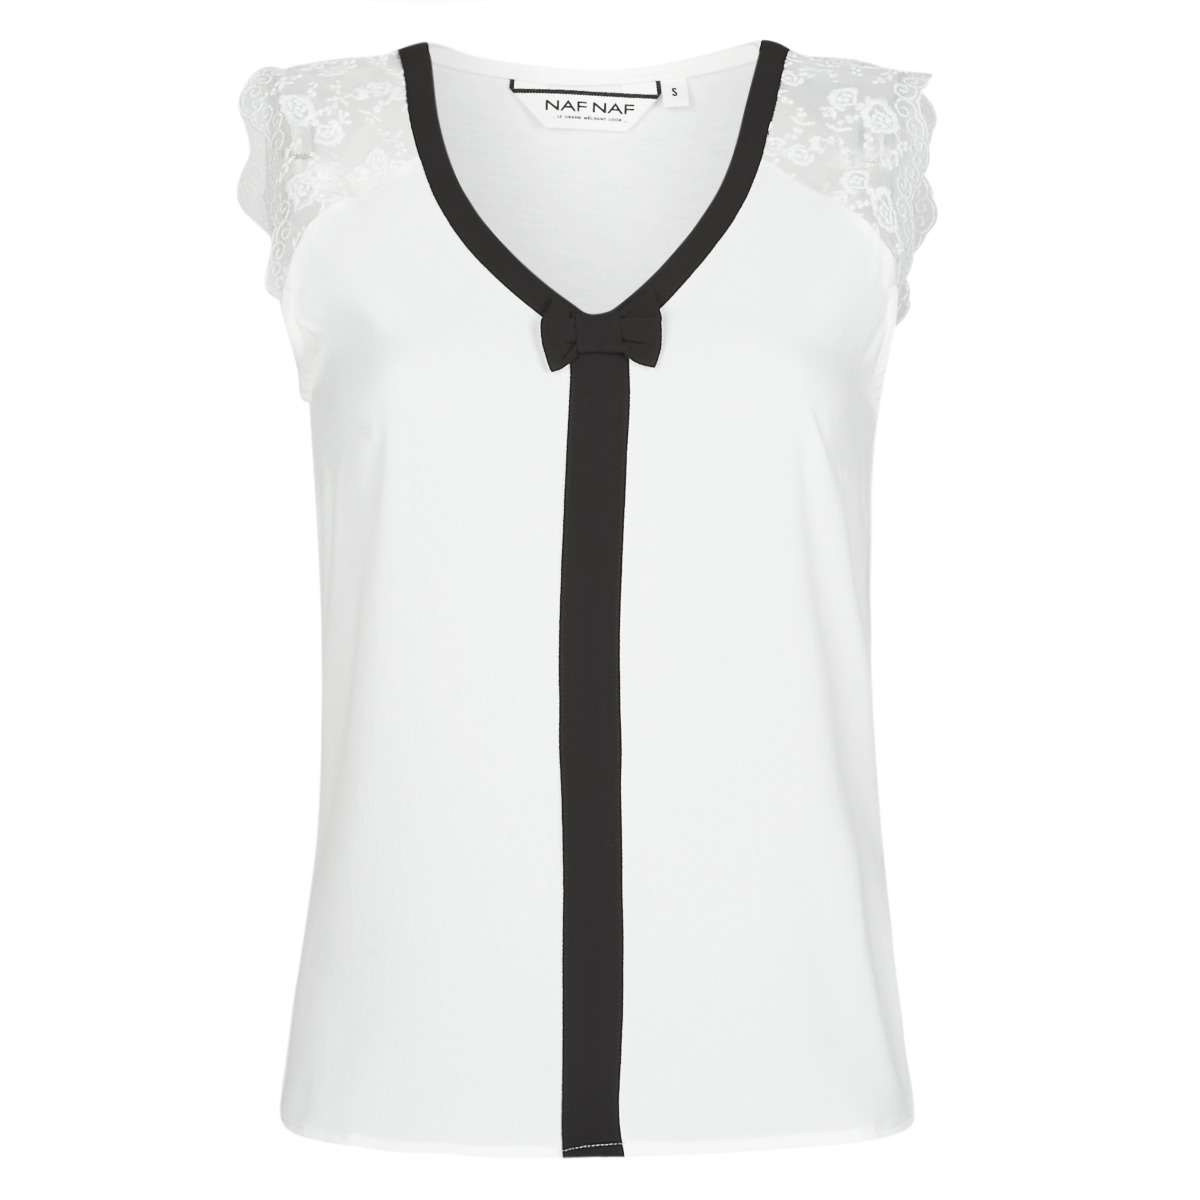 Spartoo - Women's Blouse in White from Naf Naf GOOFASH